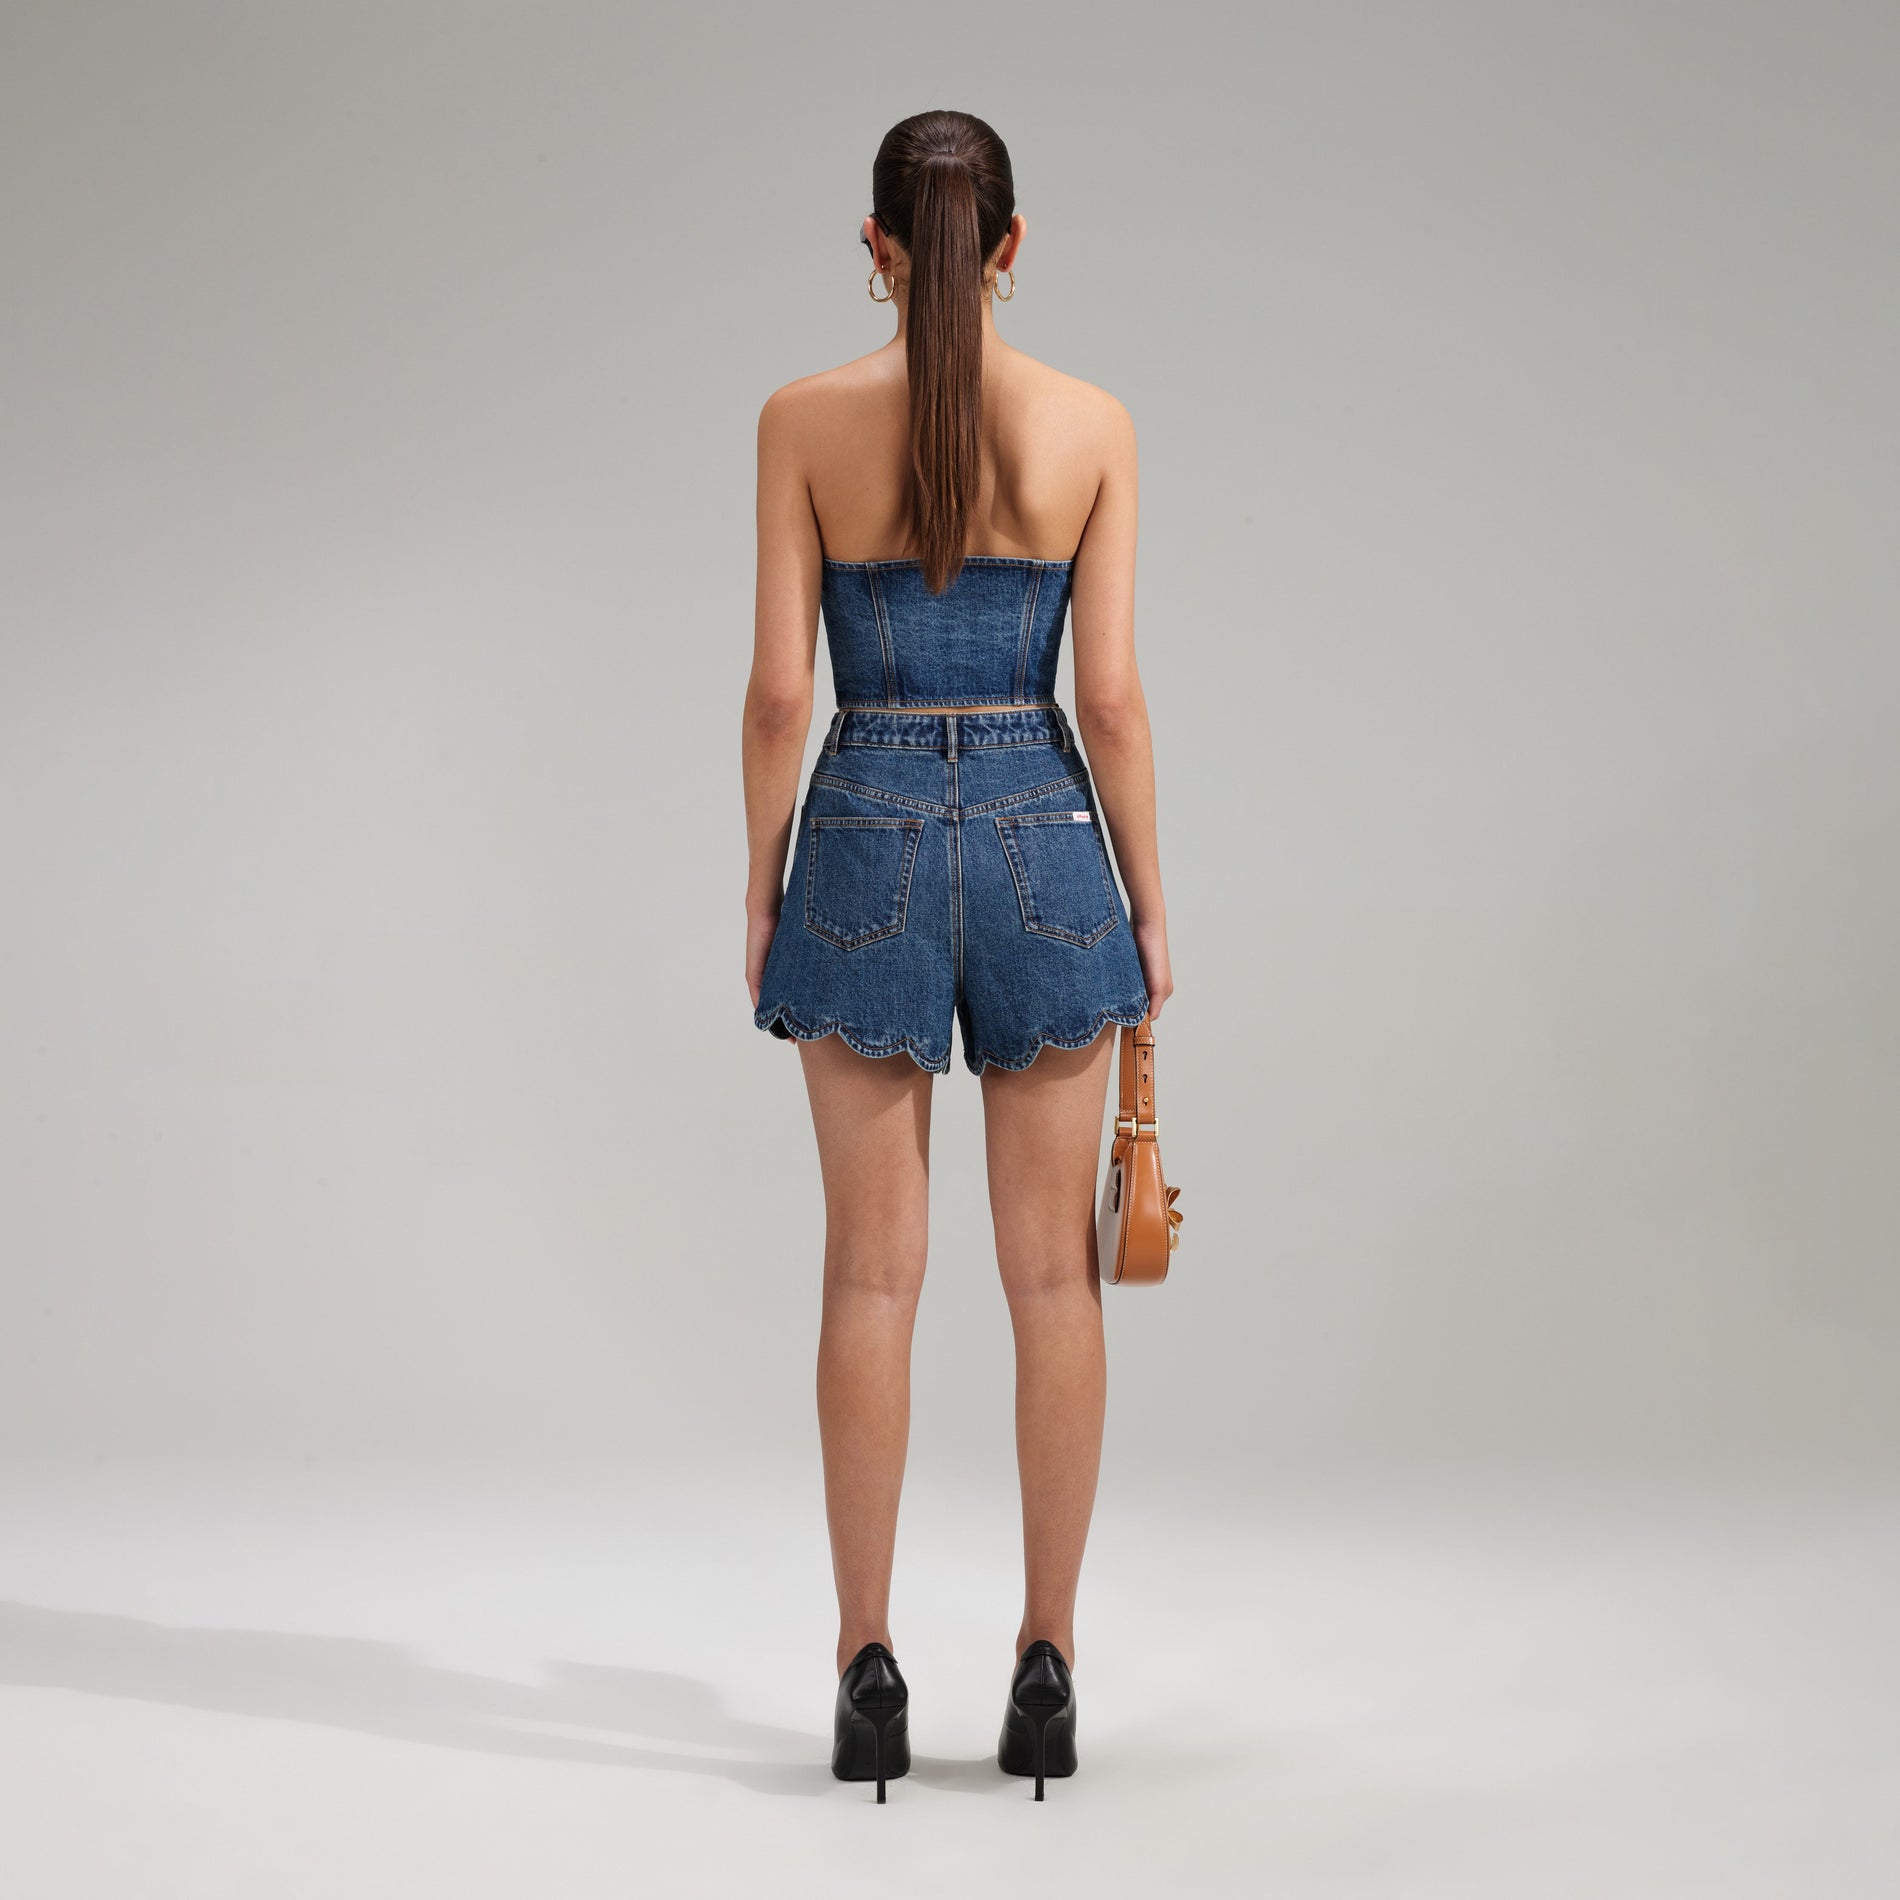 A woman wearing the Bandeau Denim Crop Top With Scalloped Edge